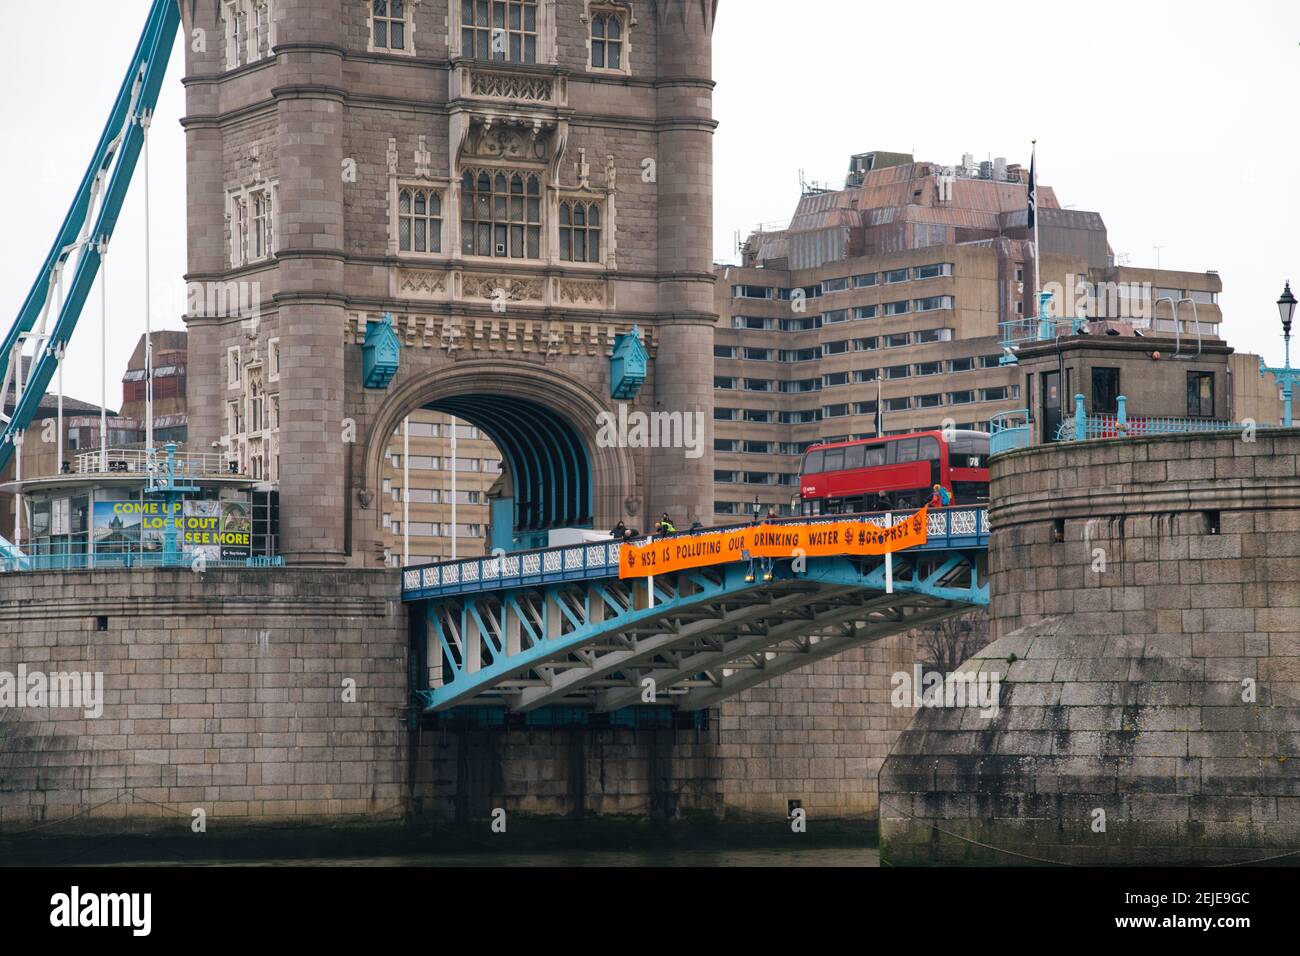 London, UK. 22nd Feb, 2021. Anti HS2 protestors hang a banner from Tower Bridge calling on the government to stop the HS2 project. Credit: Denise Laura Baker/Alamy Live News Stock Photo